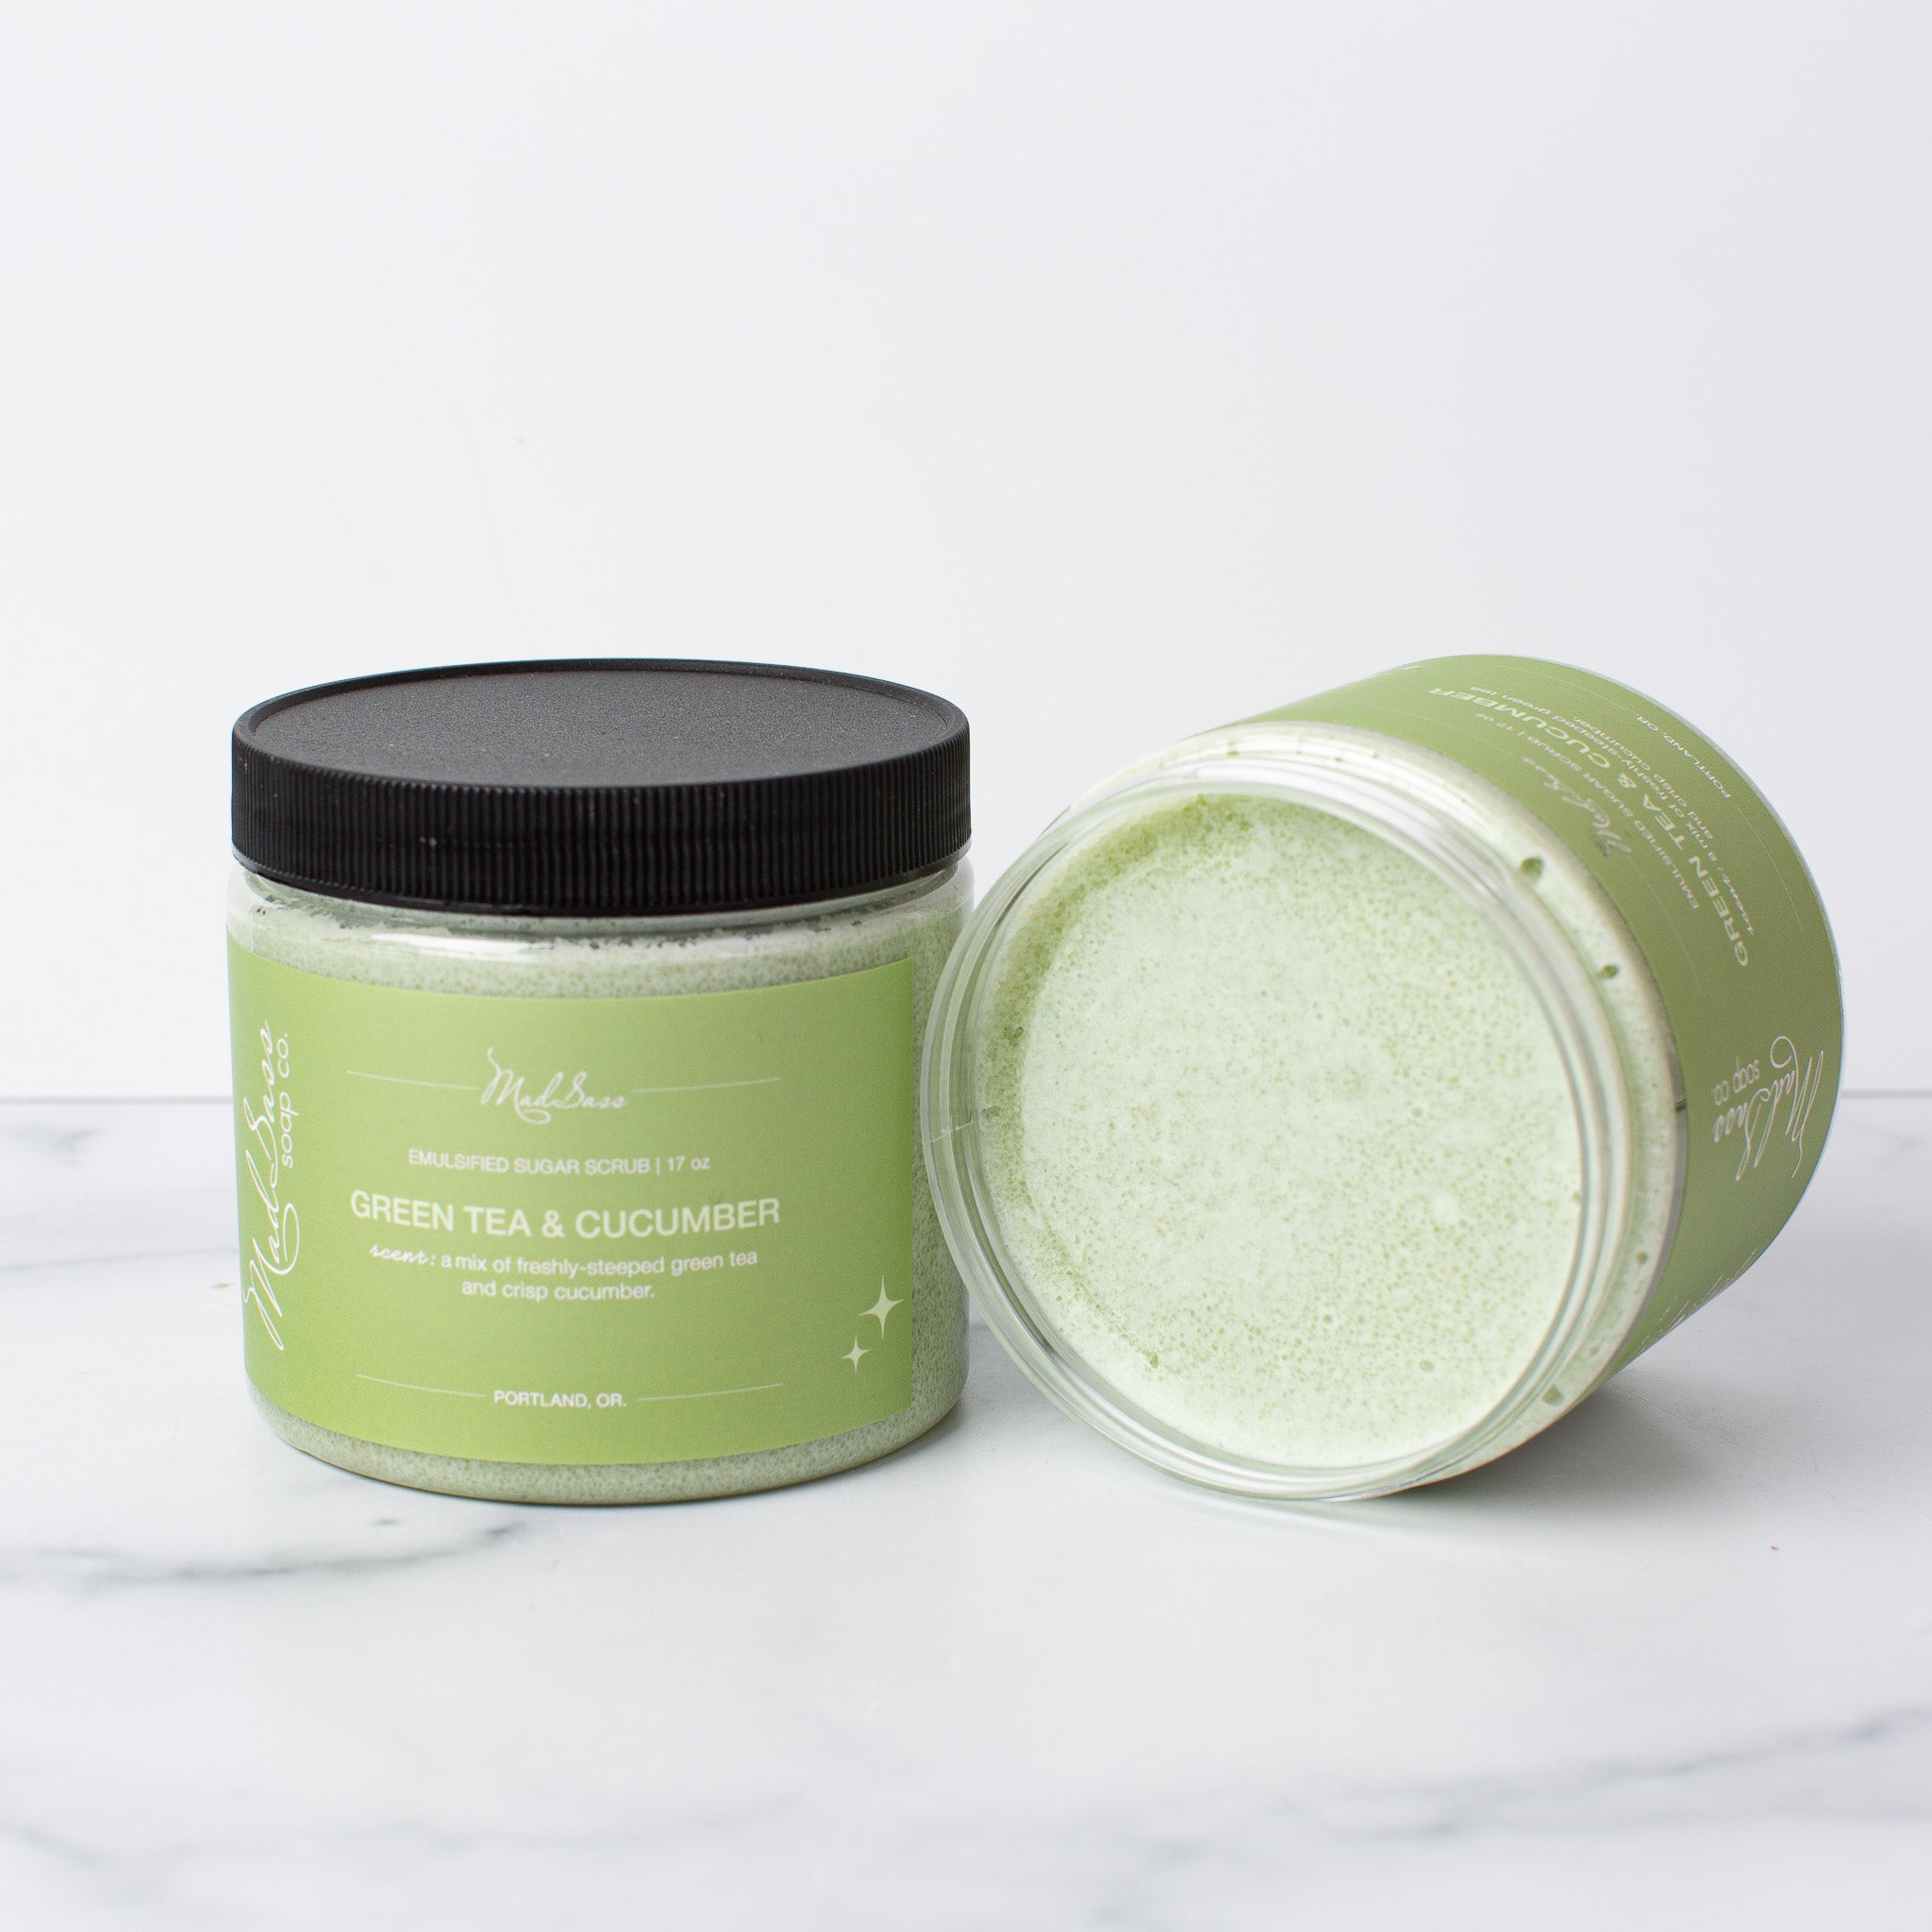 Two Green Tea & Cucumber Emulsified Sugar Scrubs, with one on its side, on a white background.